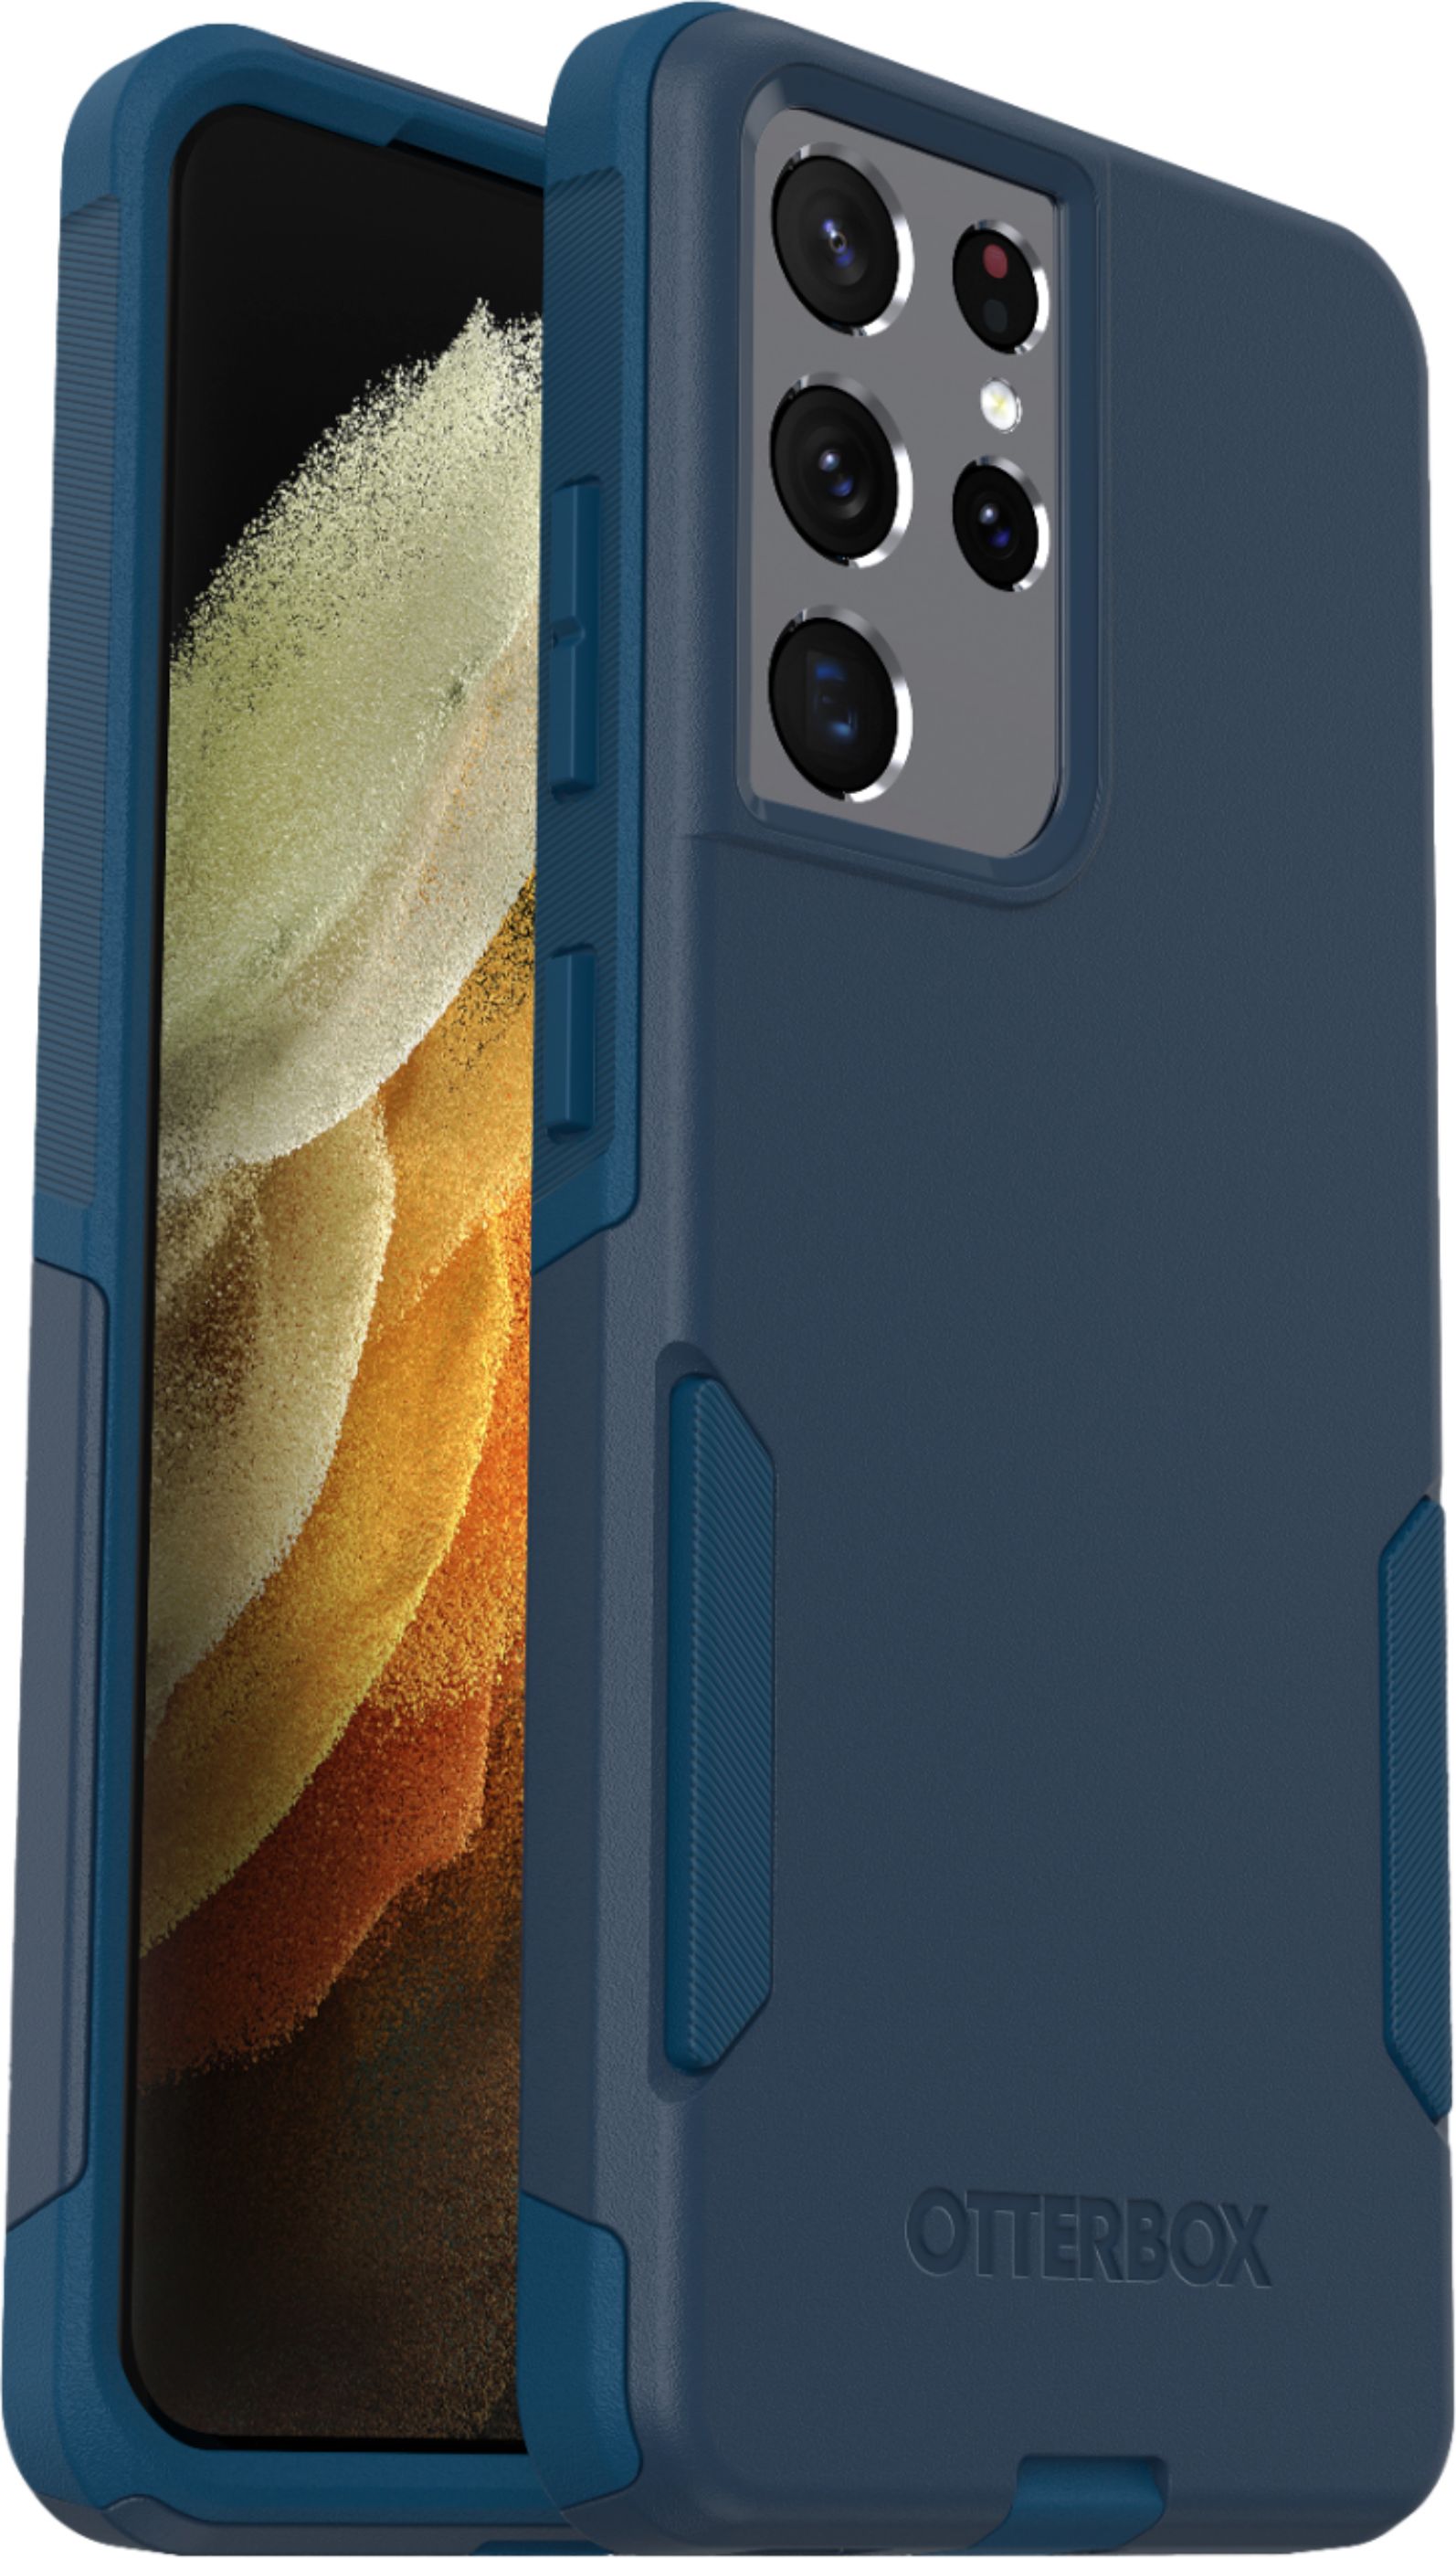 Angle View: OtterBox - Commuter Series for Samsung Galaxy S21 Ultra 5G - Bespoke Way